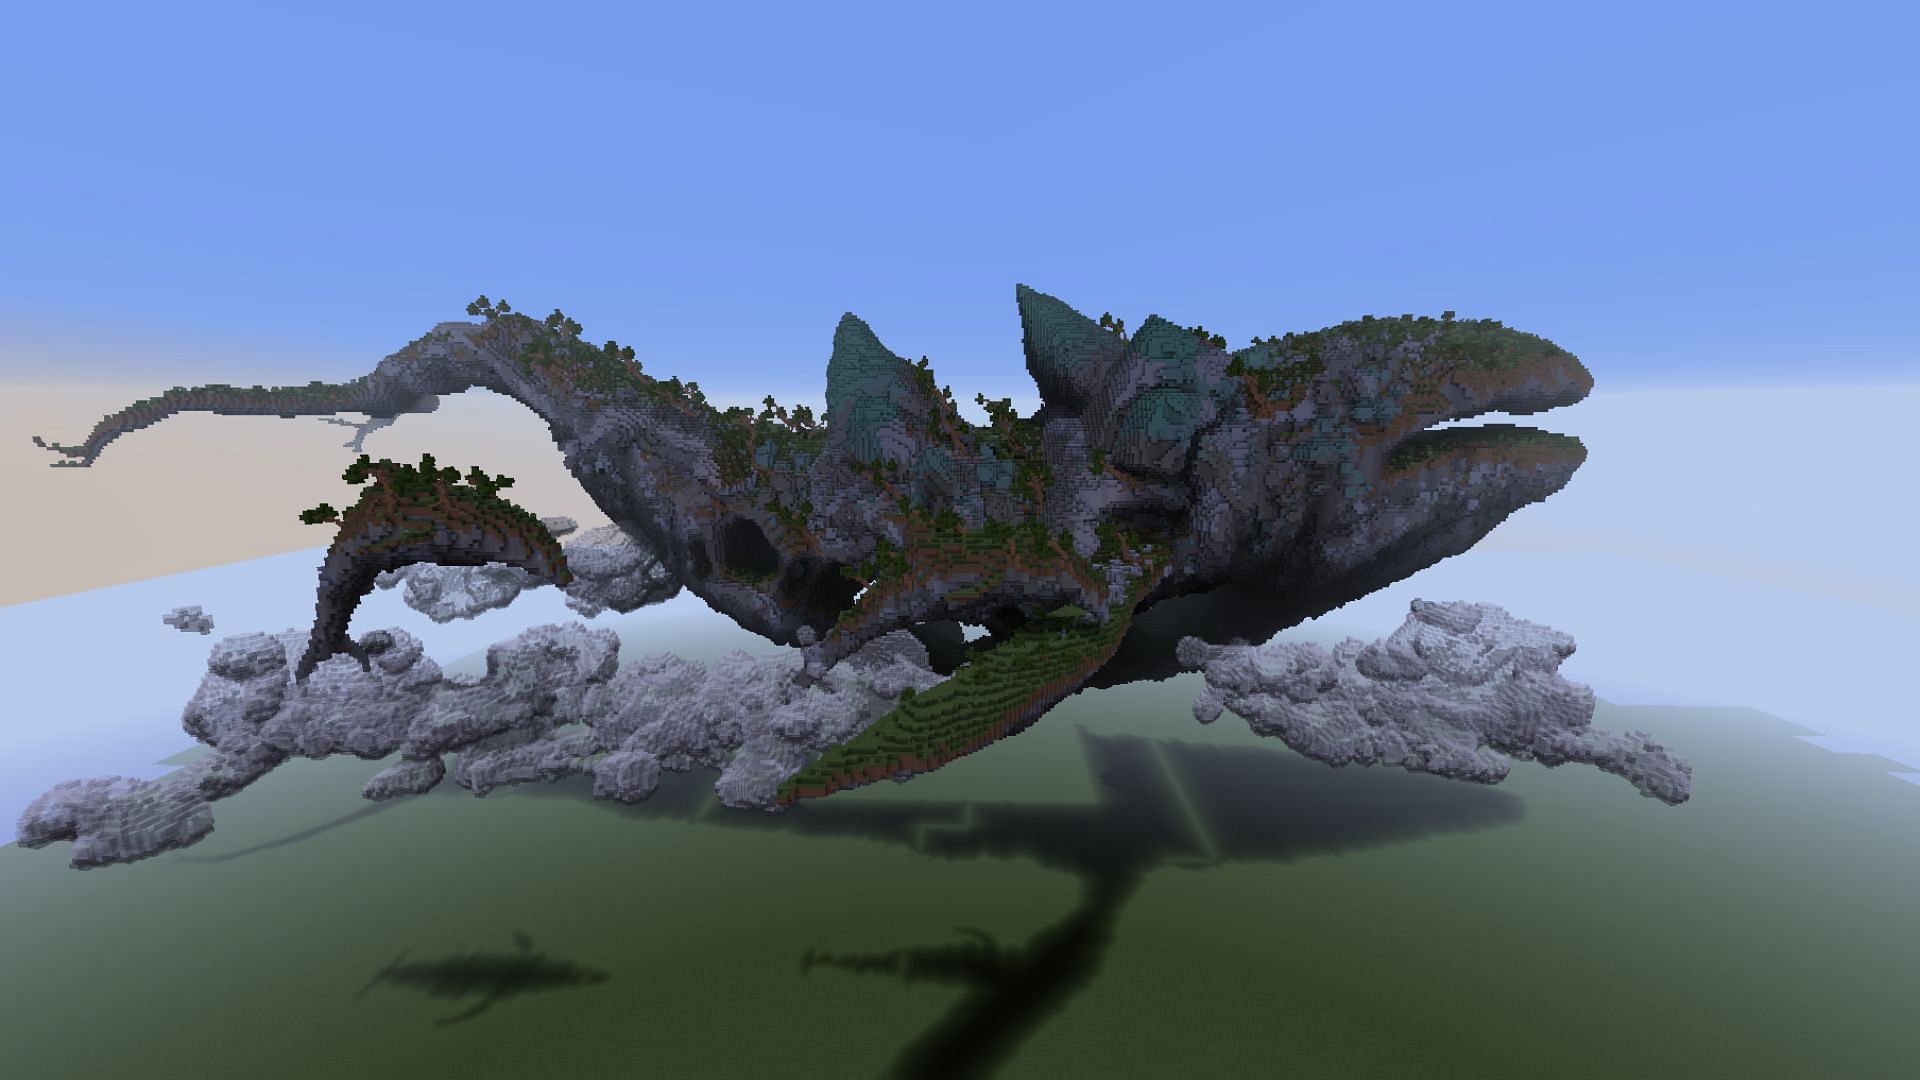 An example of a flying whale statue in Minecraft (Image via Reddit)